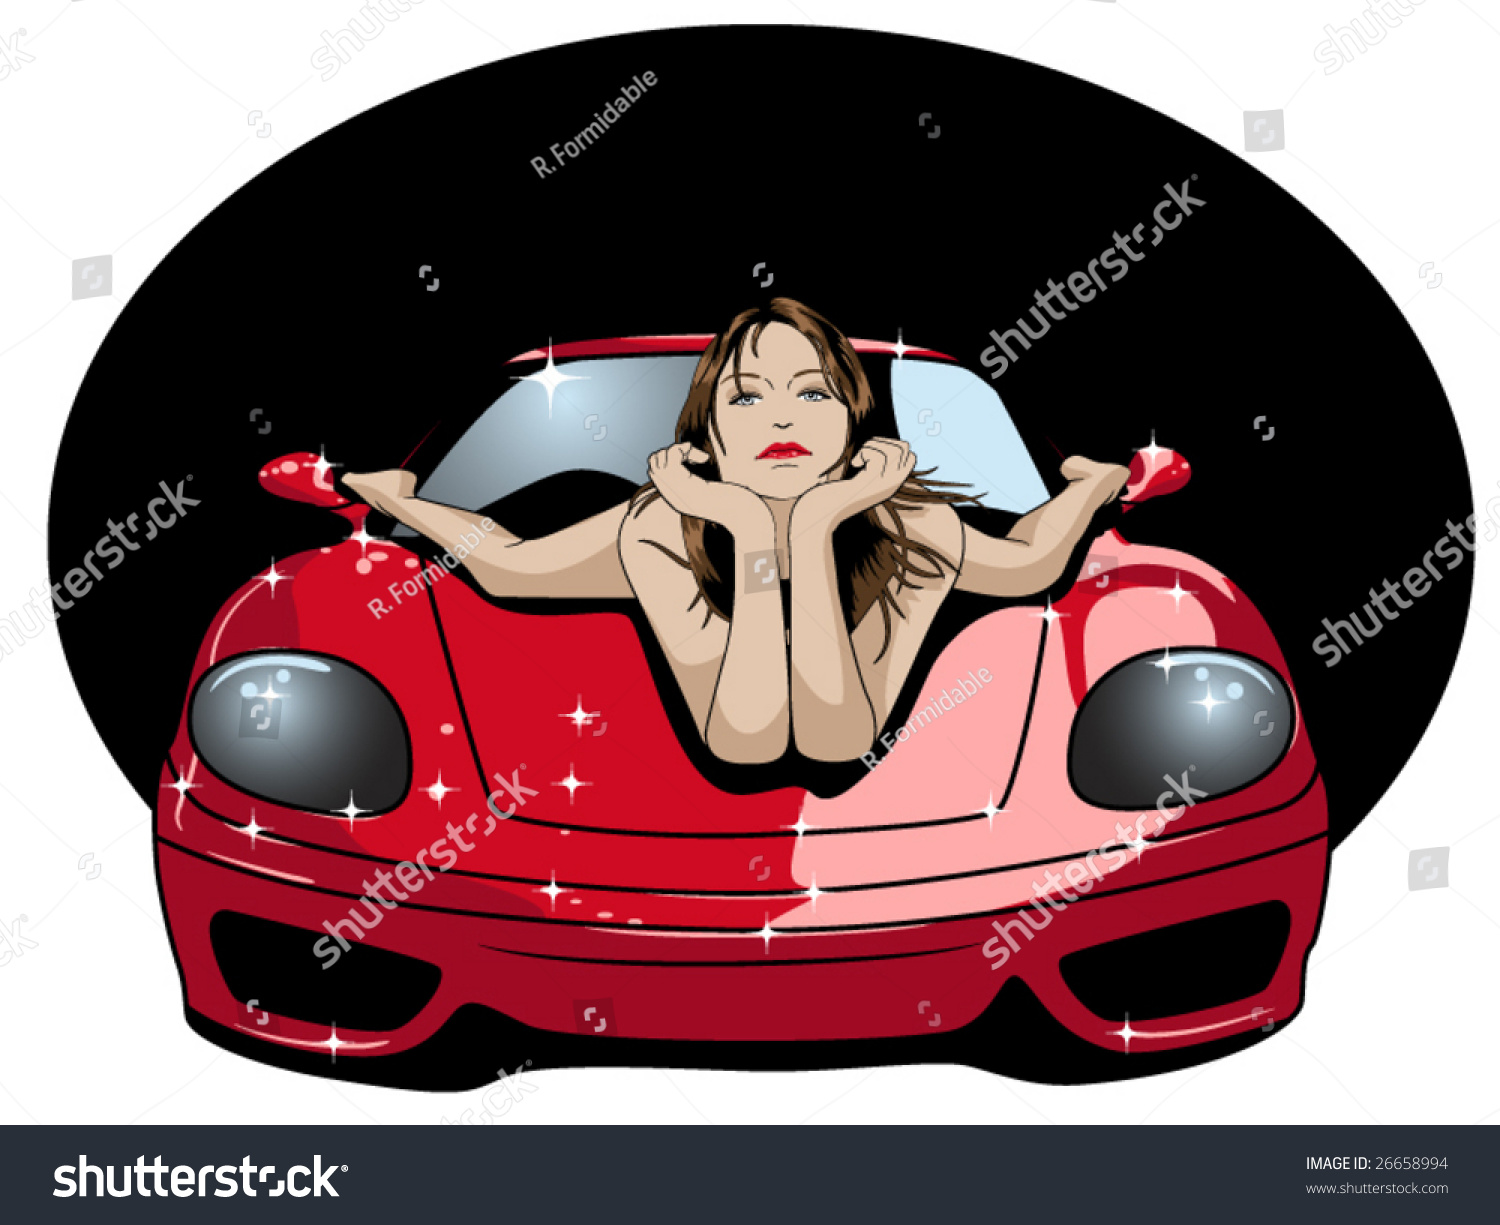 hot nude girls with nice cars hd pic